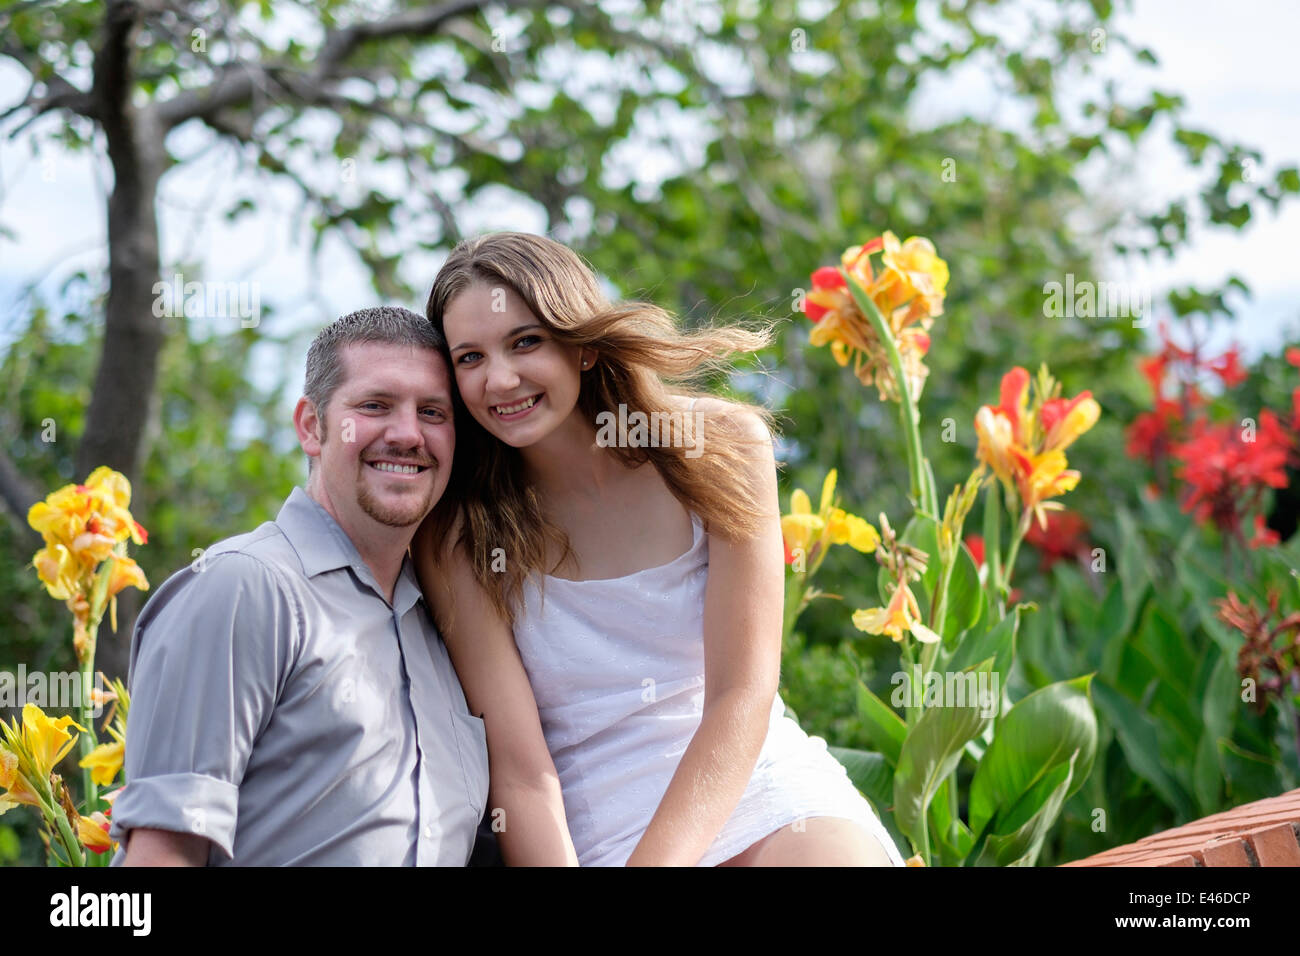 A happy, loving couple in their 20s pose for engagement pictures in a beautiful park surrounded by colorful blooming Irises. USA. Stock Photo